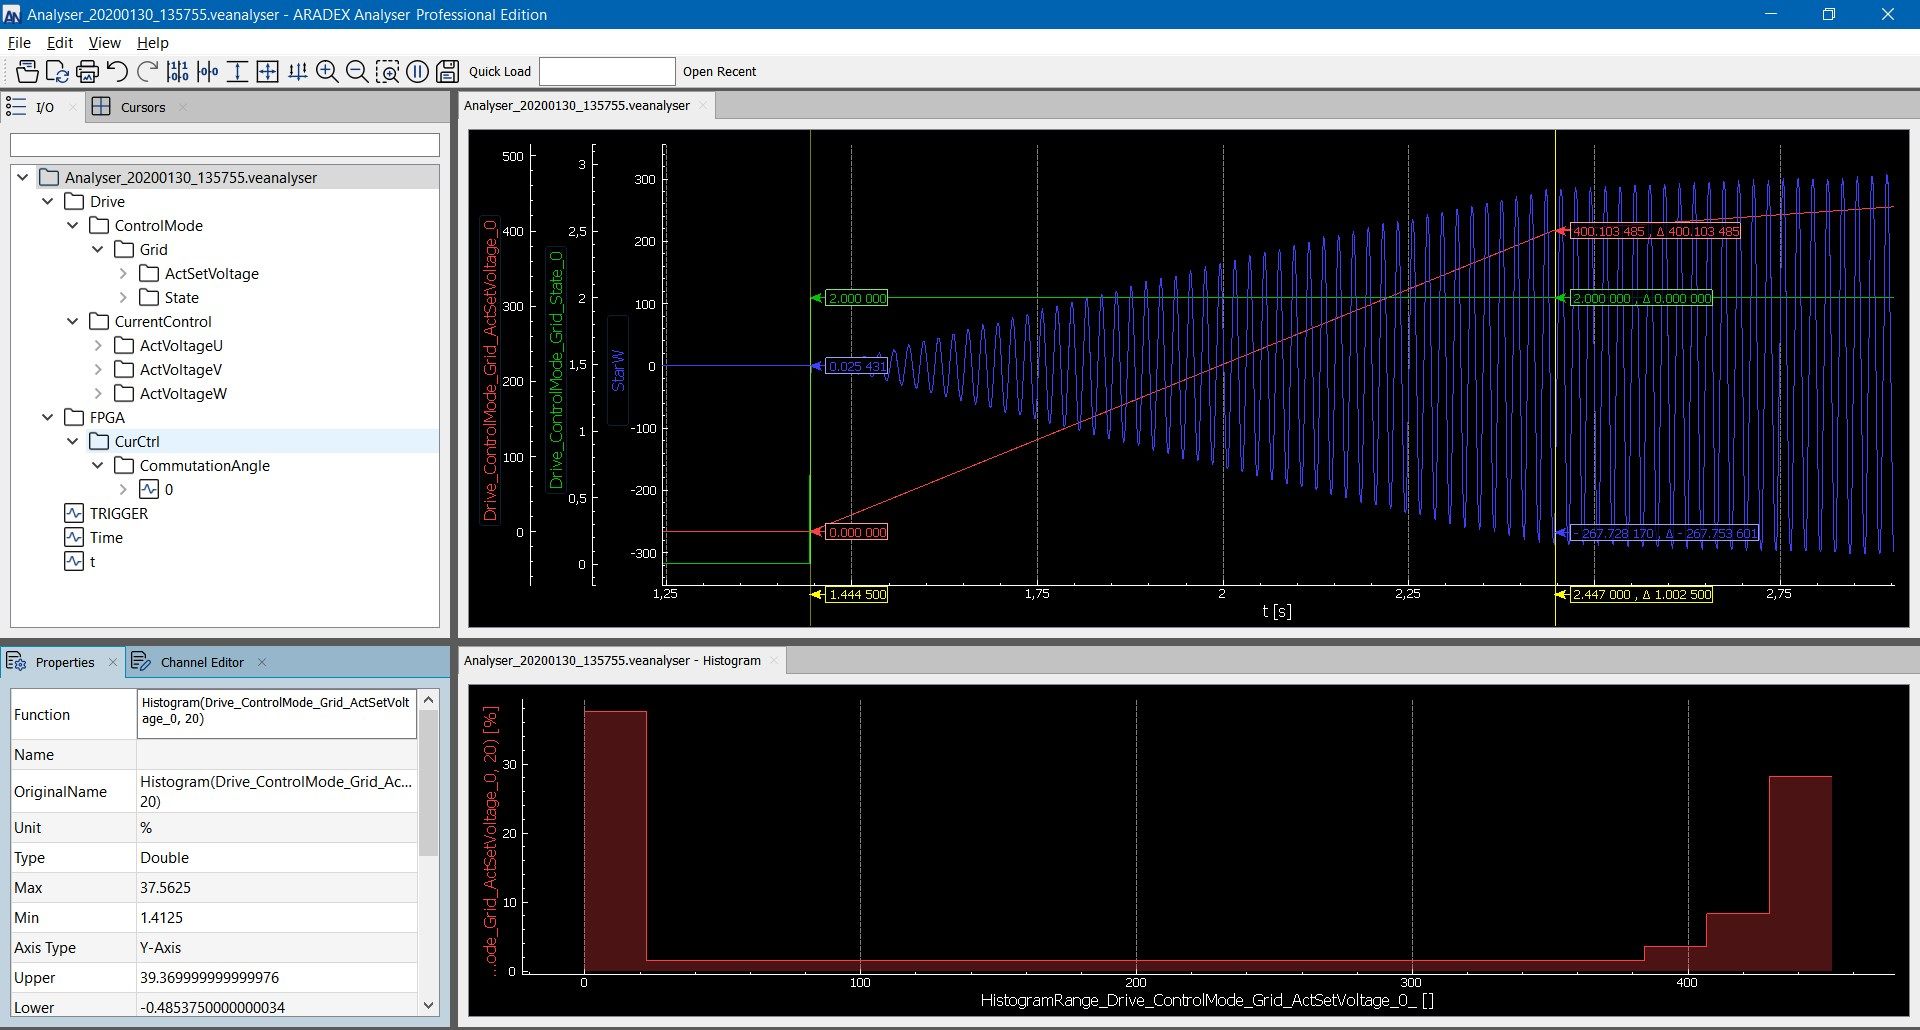 Analyser Overview with Histogram